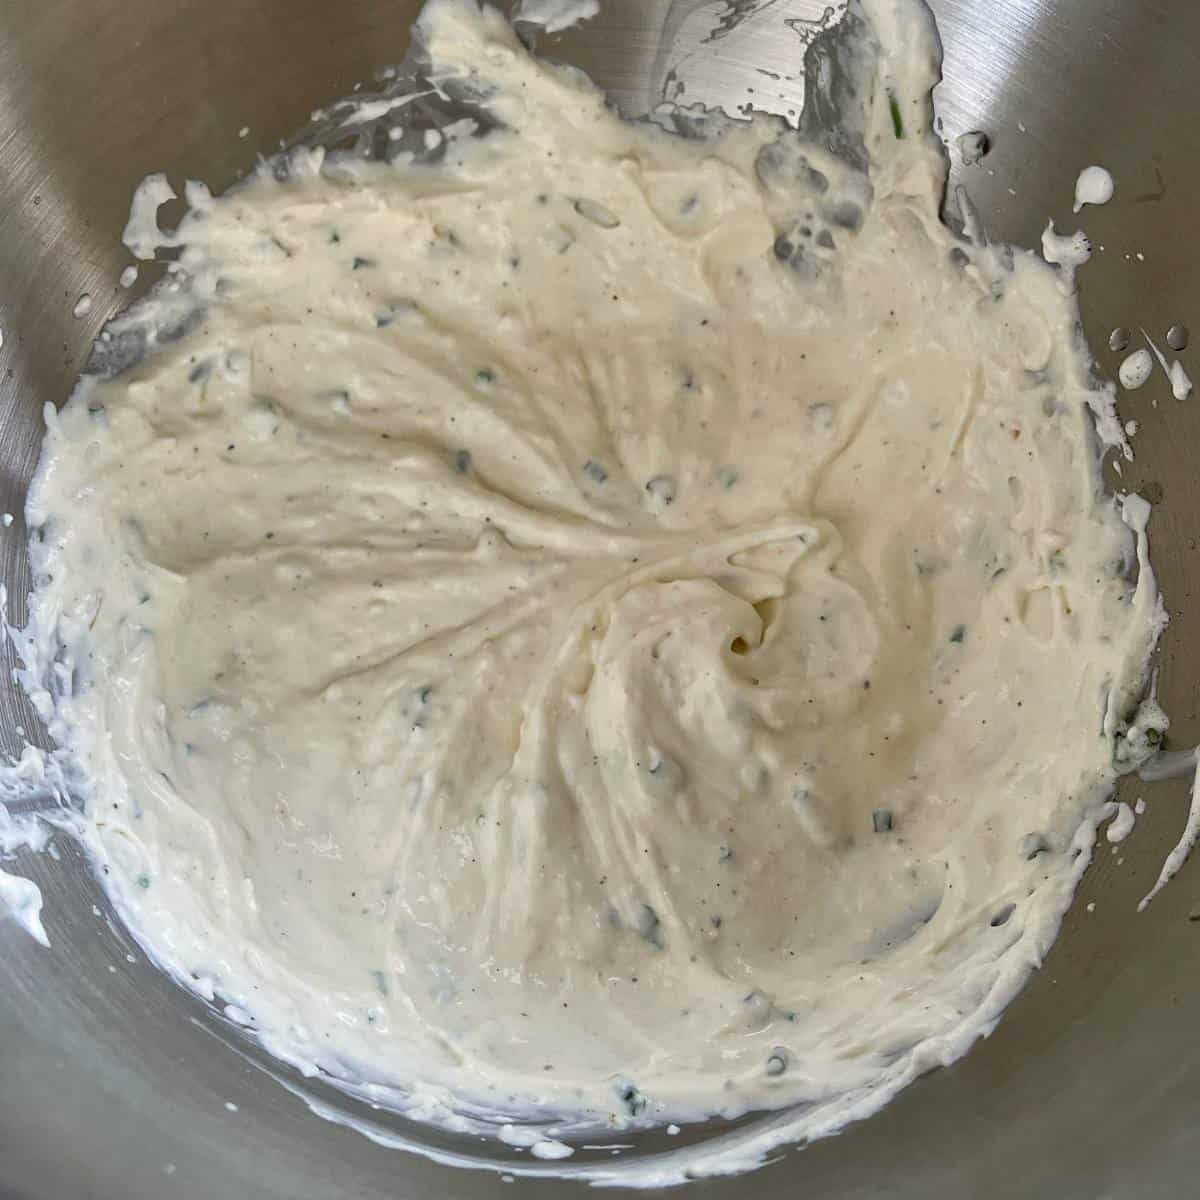 The creamed horseradish in a mixing bowl